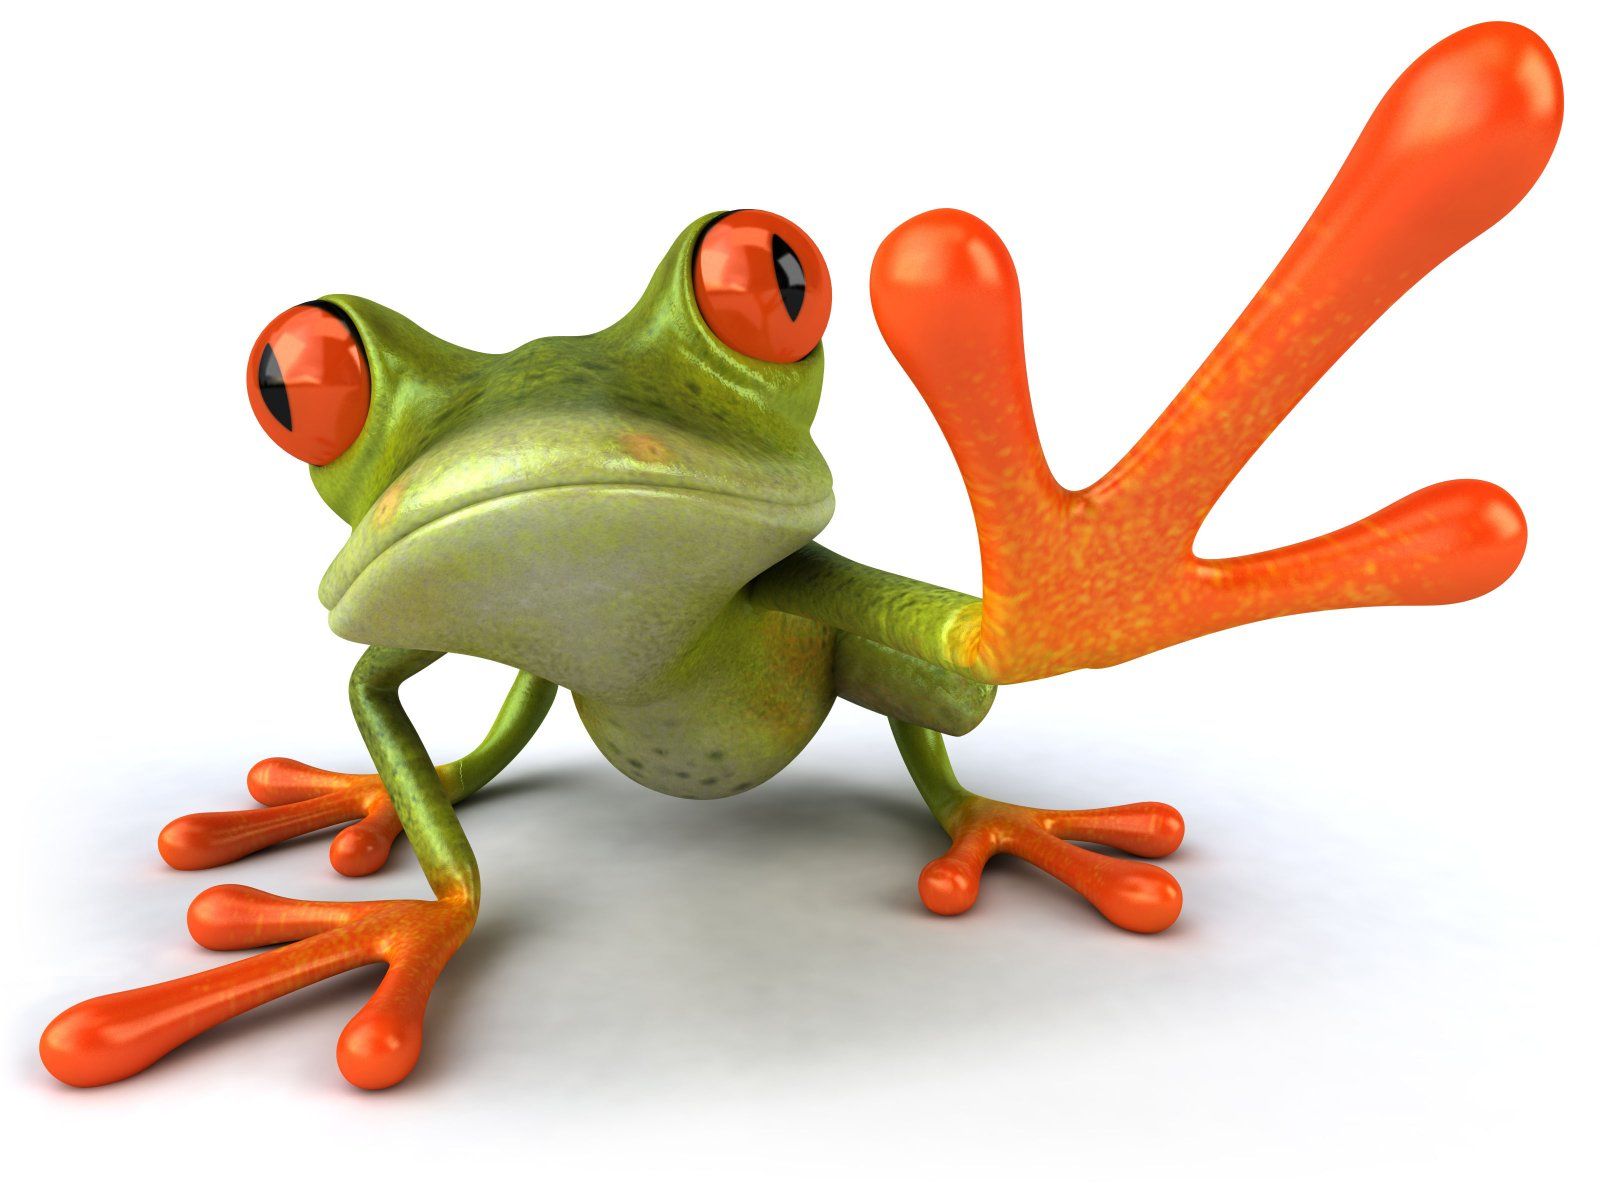 Crazy green frog wallpaper - Animals wallpapers - Free wallpapers ...